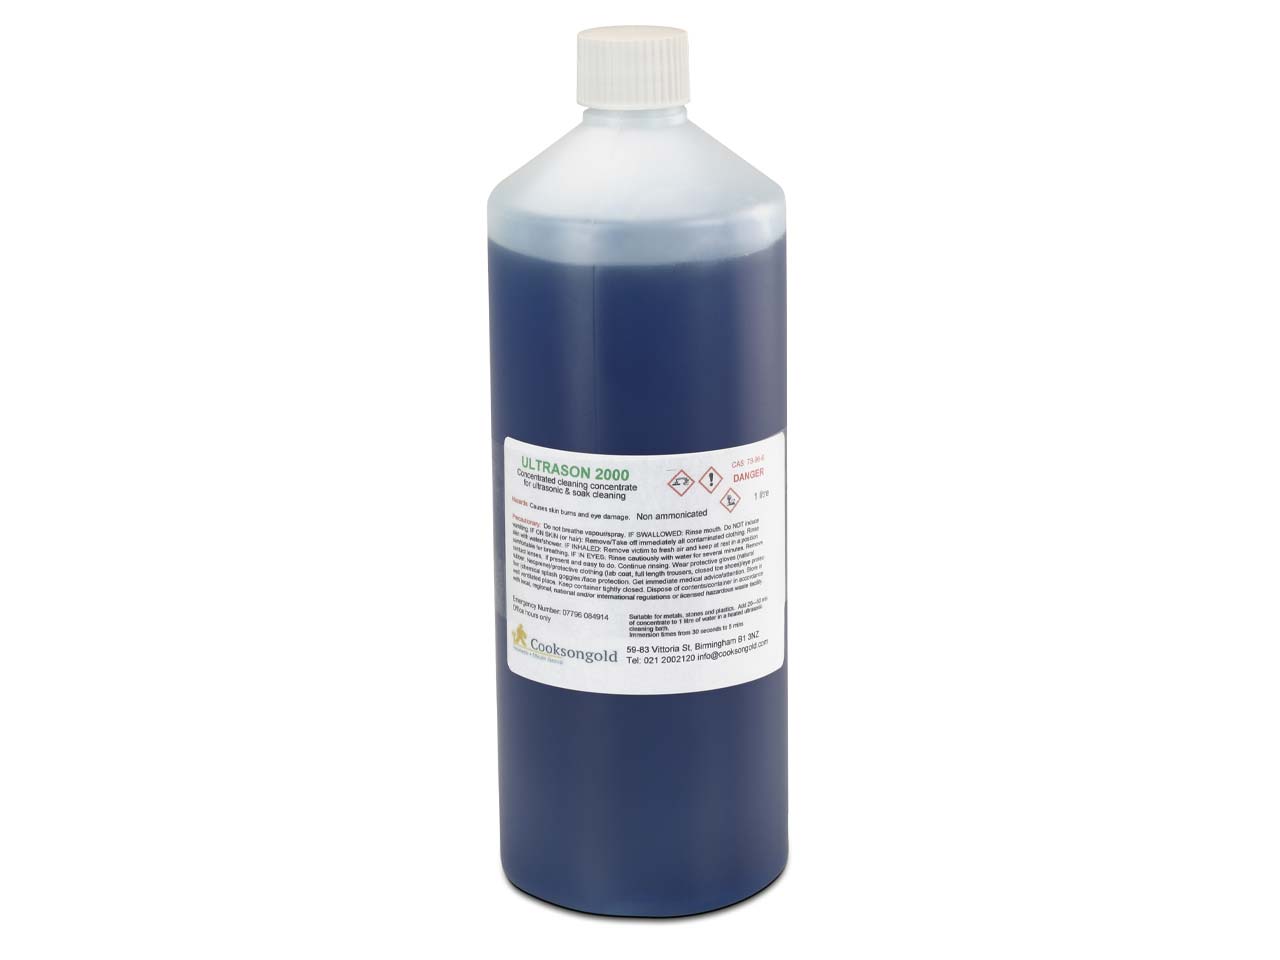 Do you have instructions for Ultrasonic 2000 Cleaning Fluid 1 Litre Biodegradable For Ultrasonic, Un2735?